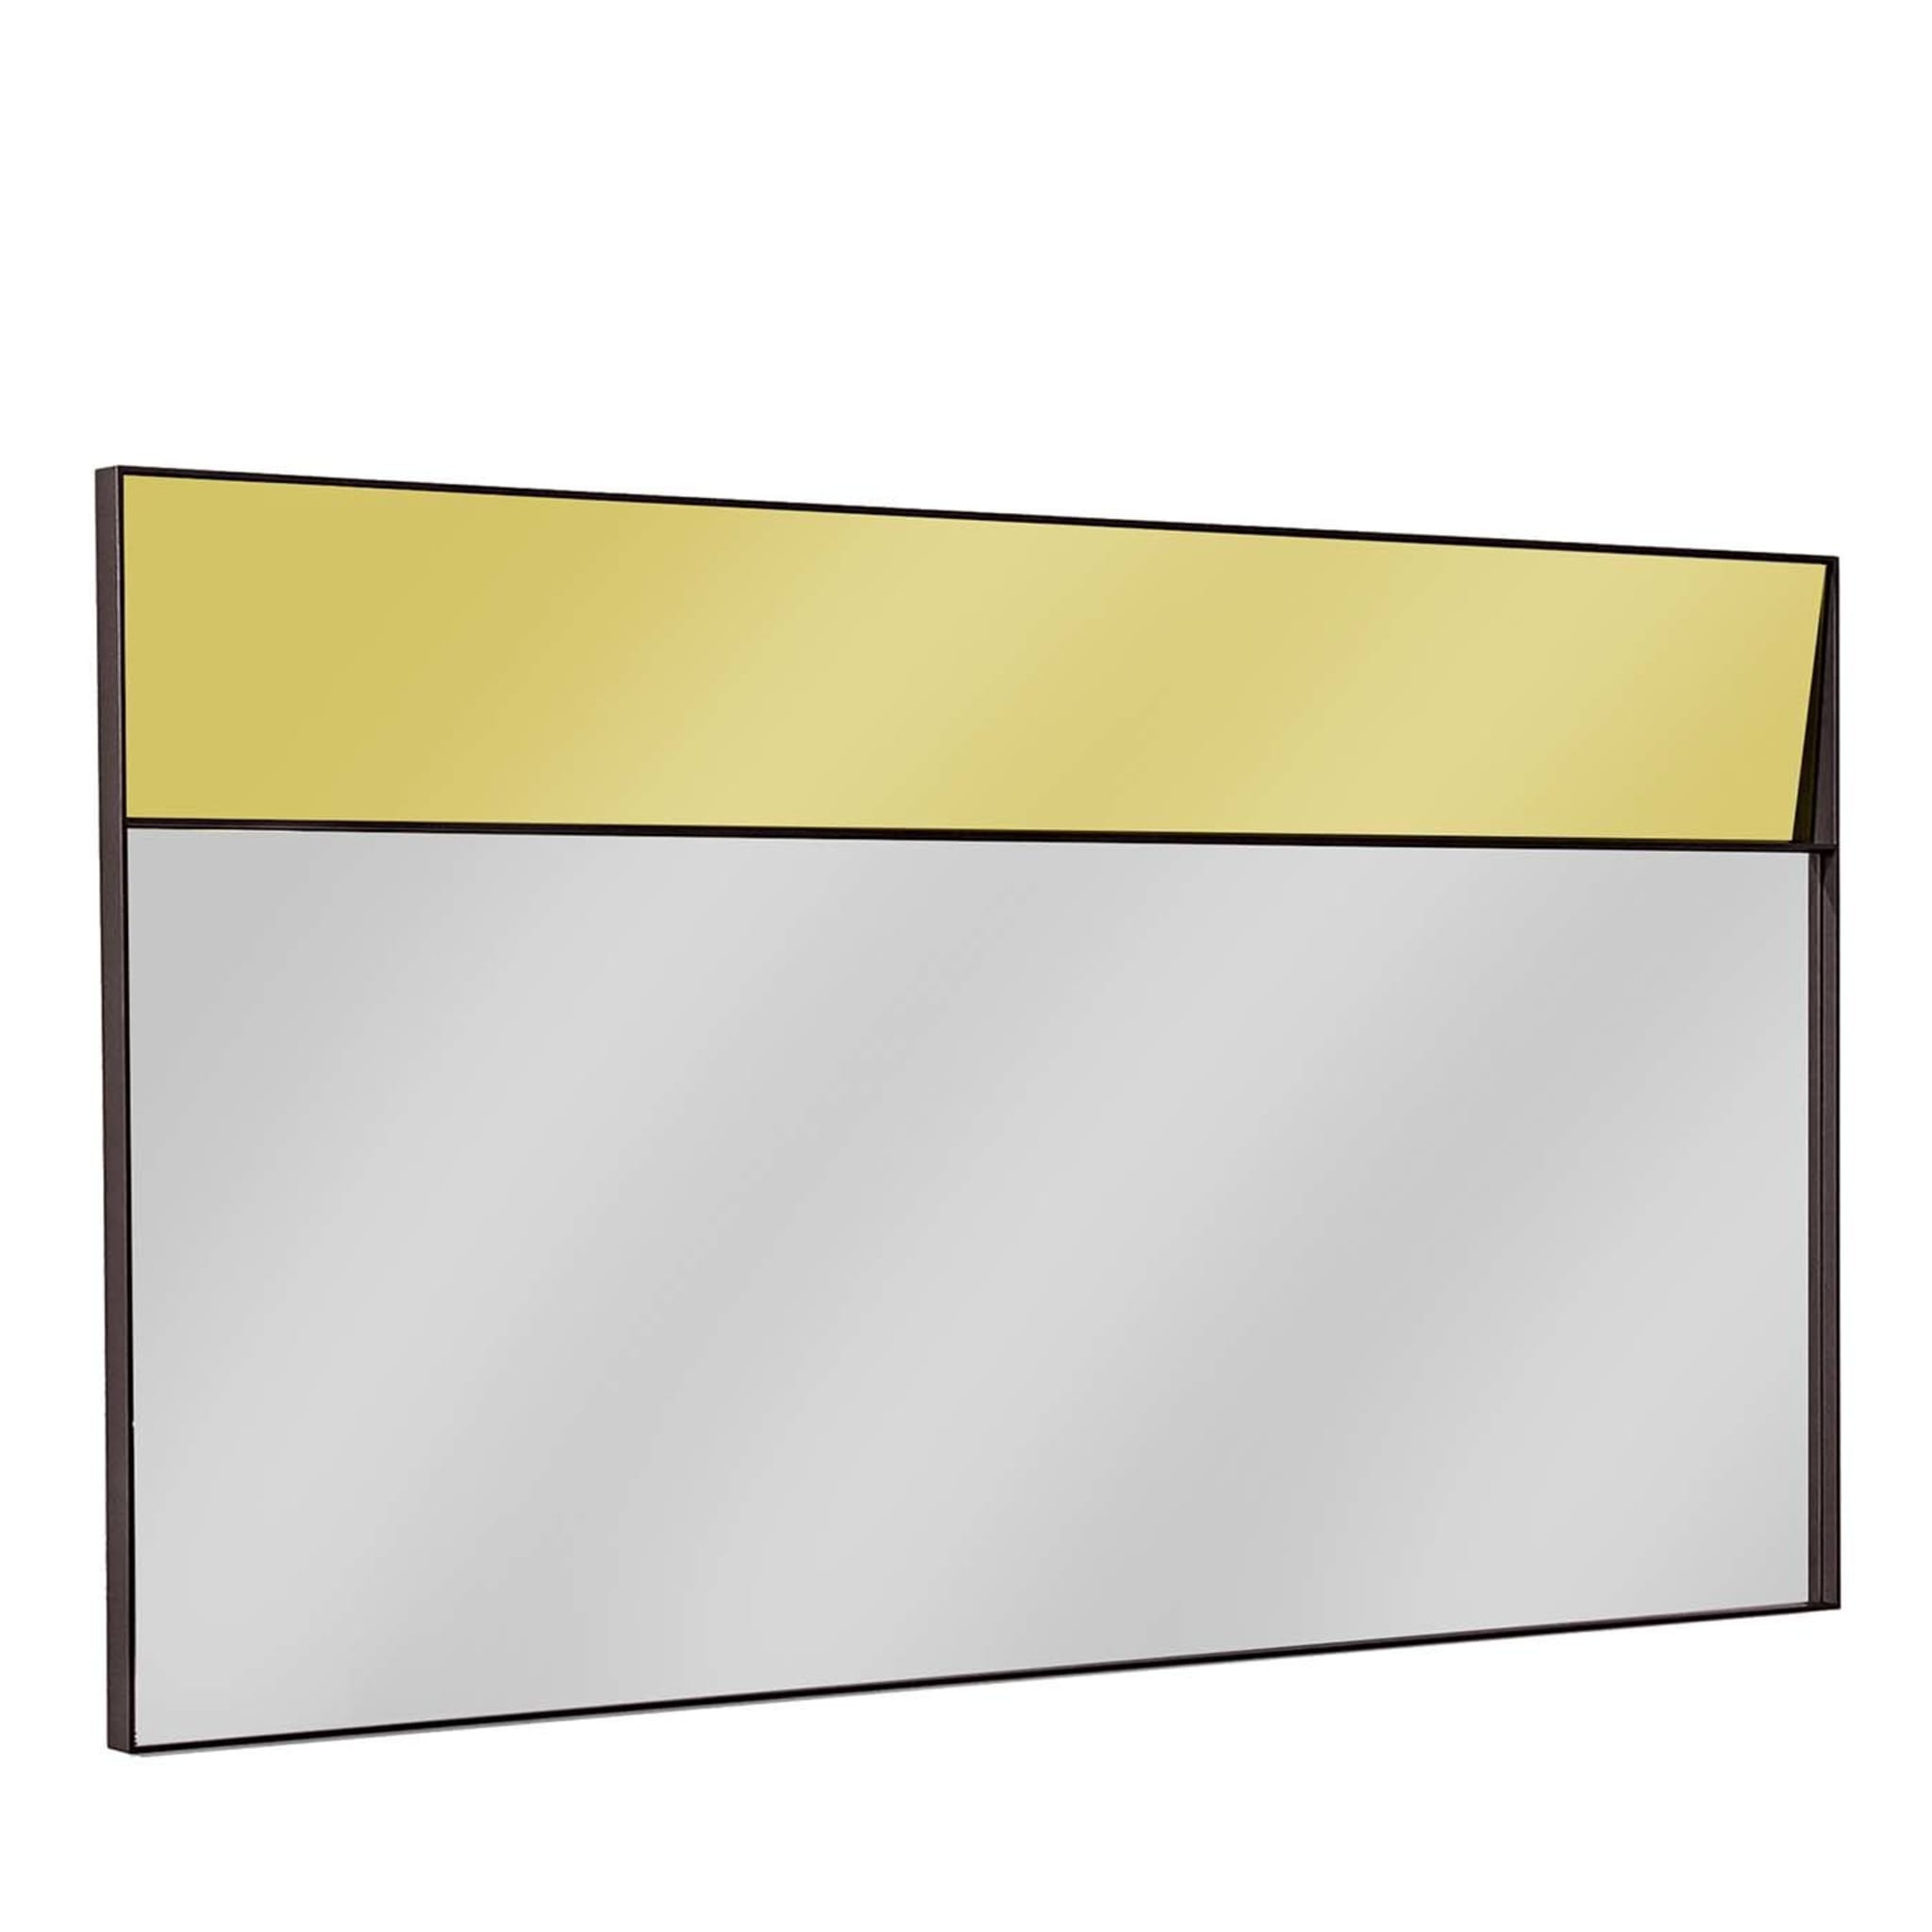 Campos Horizontal Mirror in Extralight and Gold  - Main view